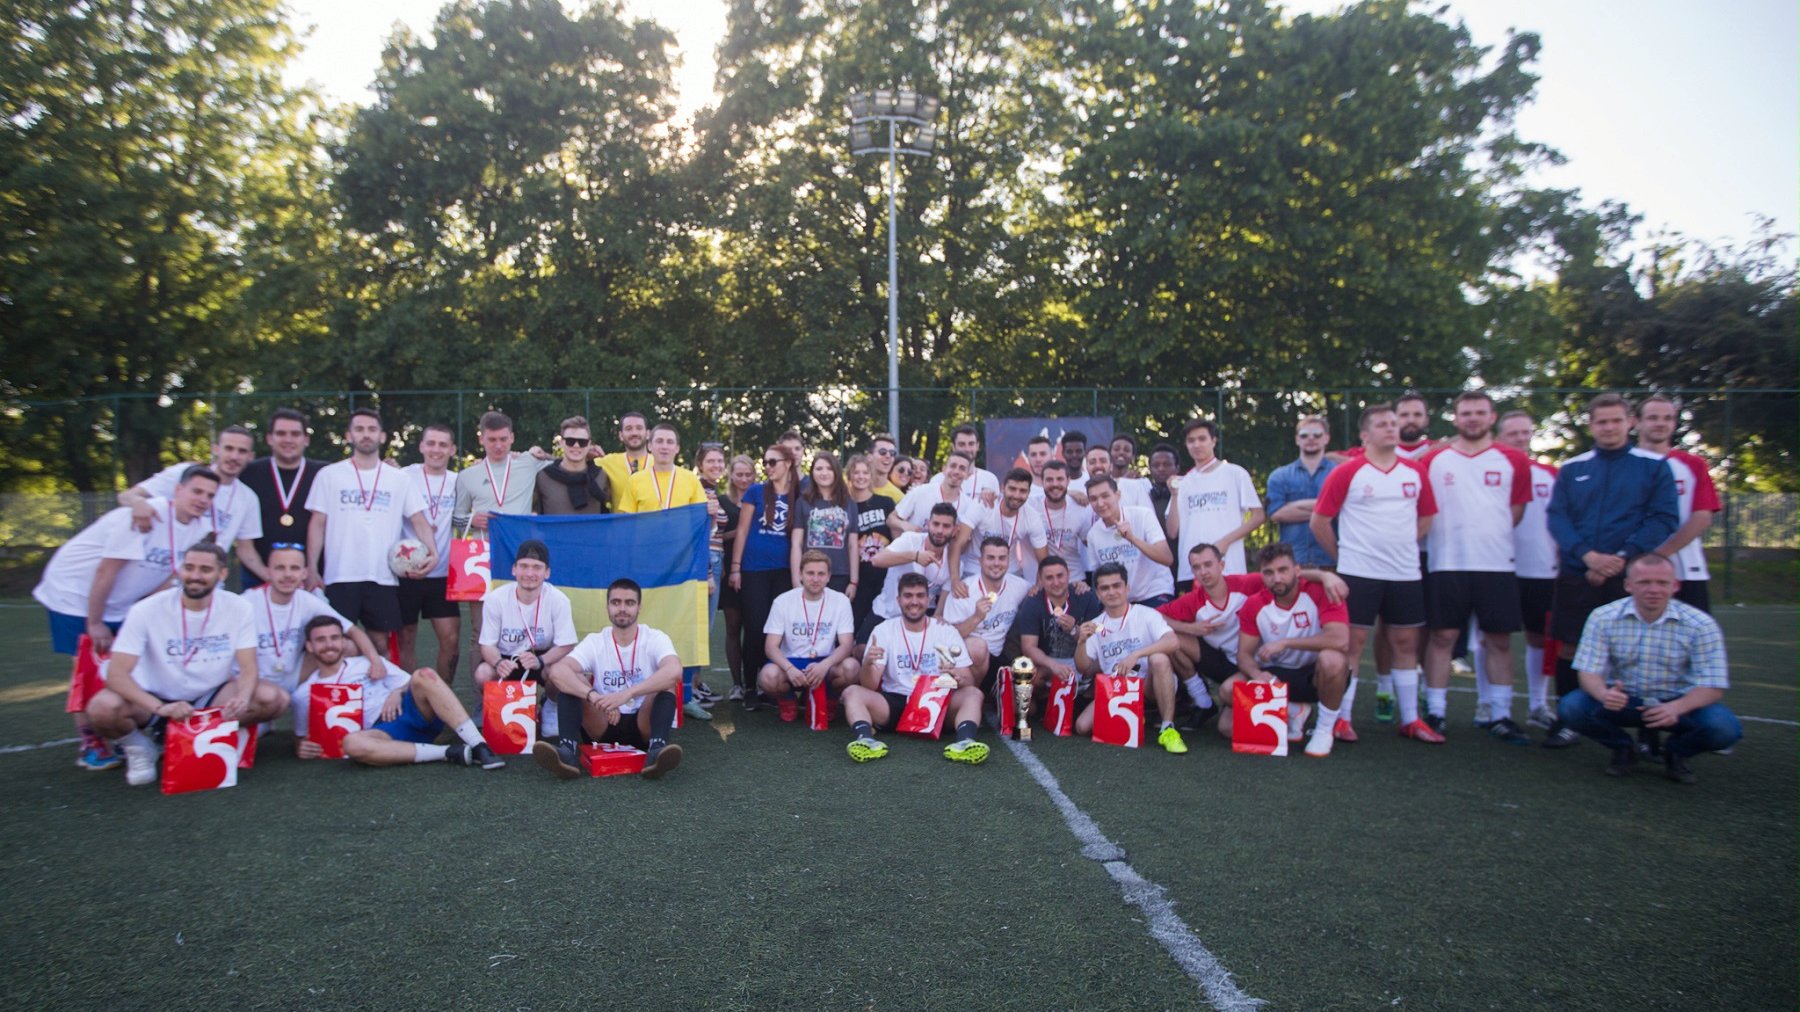 EUROASMUS AND FRIENDS CUP 2019